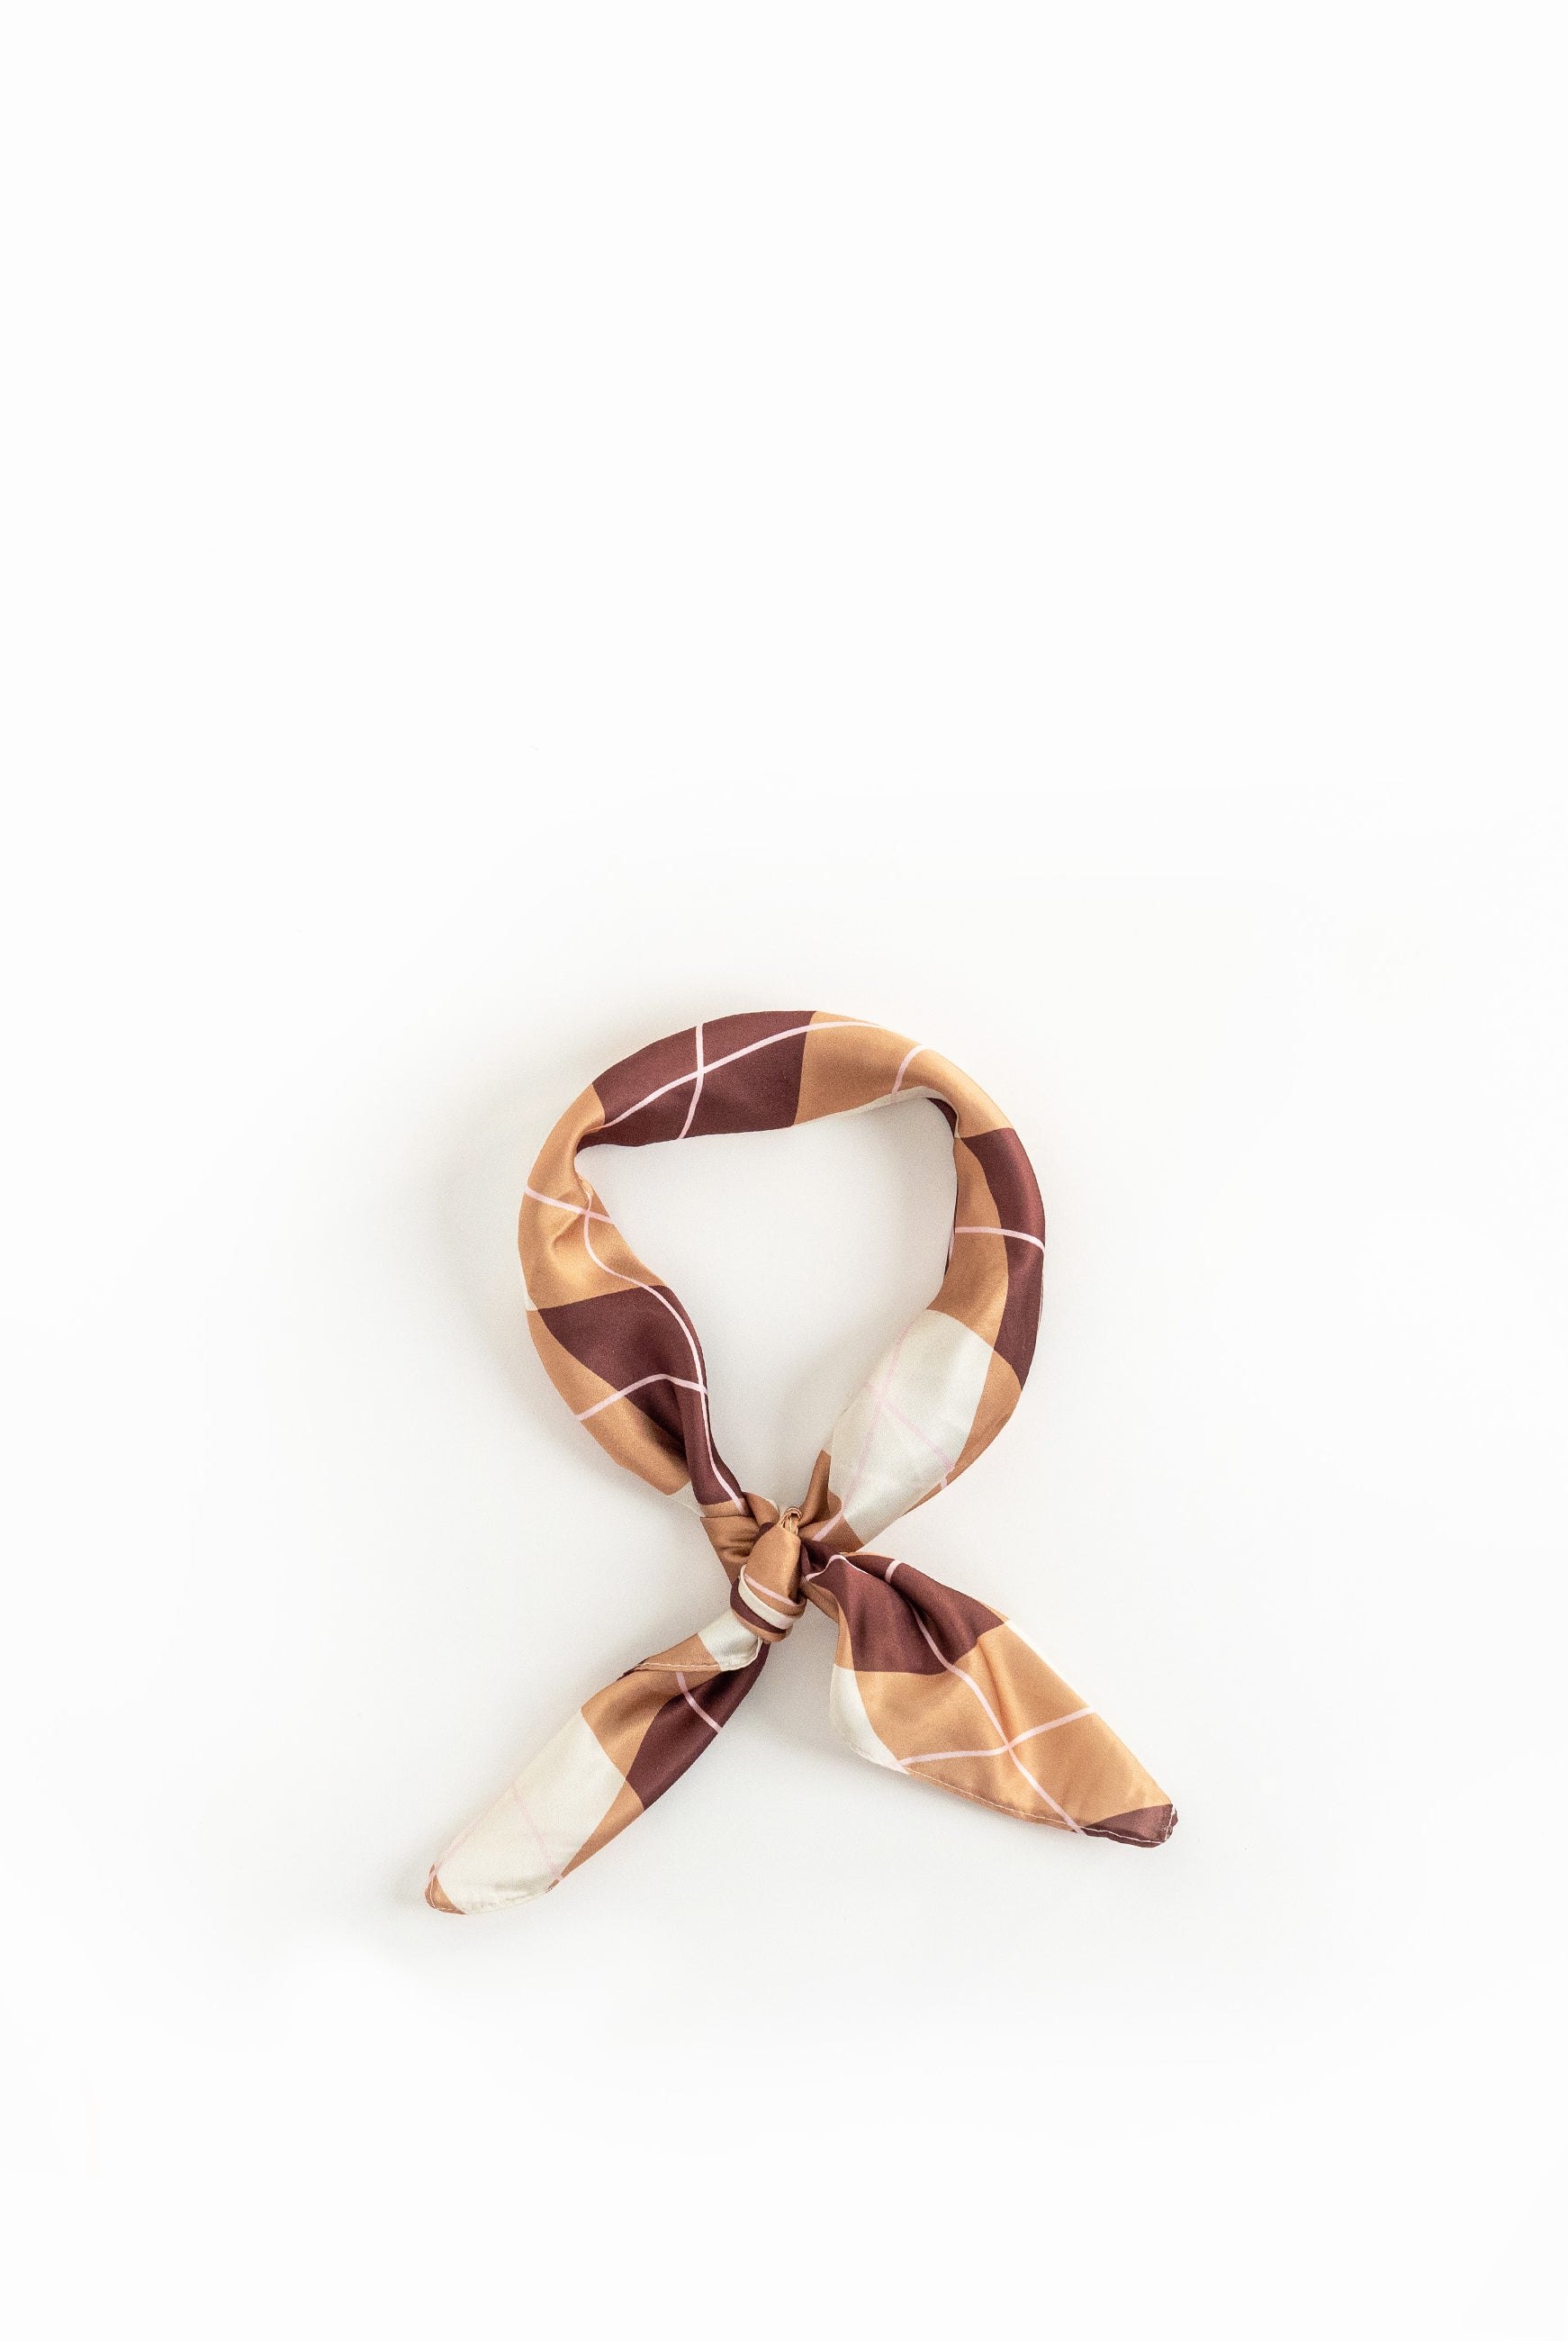 Multiway Headscarf in Brown Argyle Print | Bandana | Check | Neck Tie | Top | Festival | Party | Summer | Holiday | Beach | Women's Accessories | Accessory 